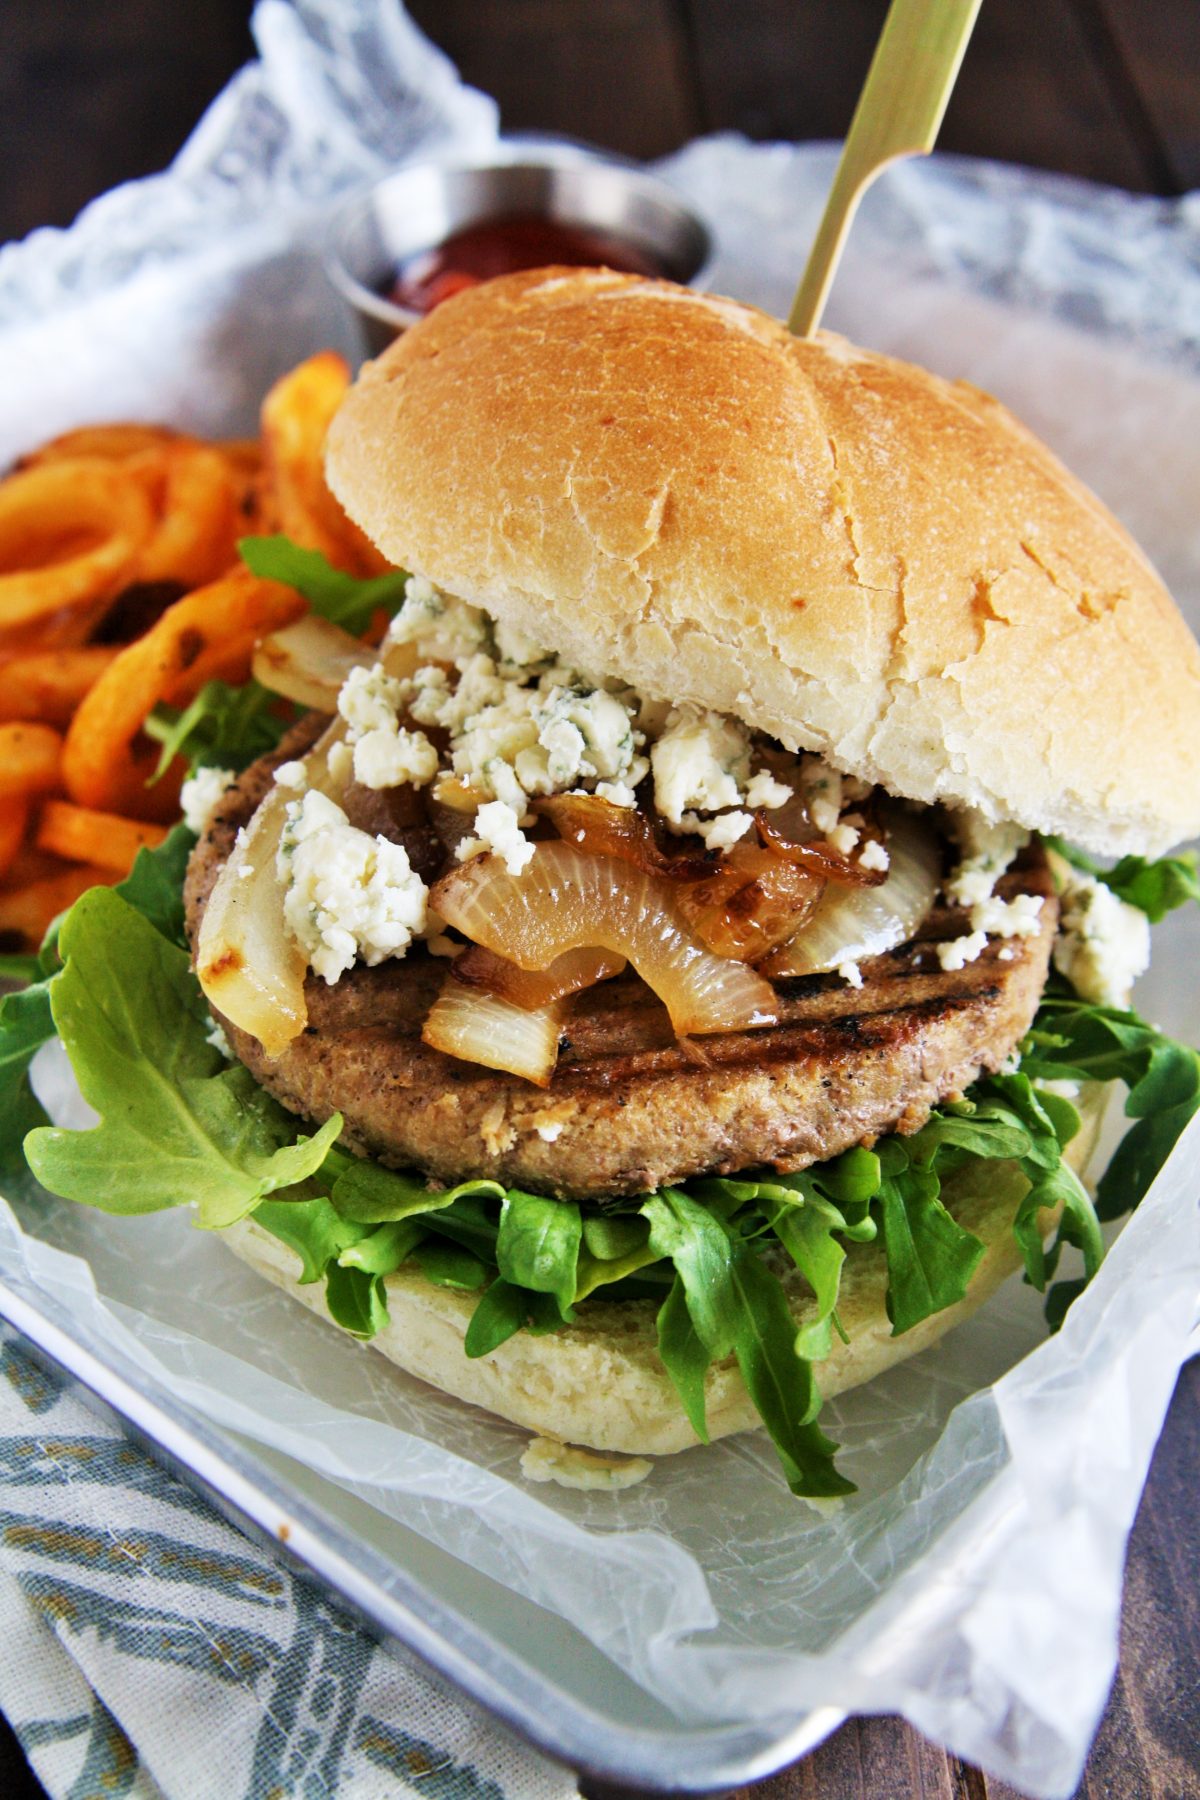 Serve up these savory turkey burgers topped with caramelized onions, blue cheese, and garlic aioli on your next grill night!